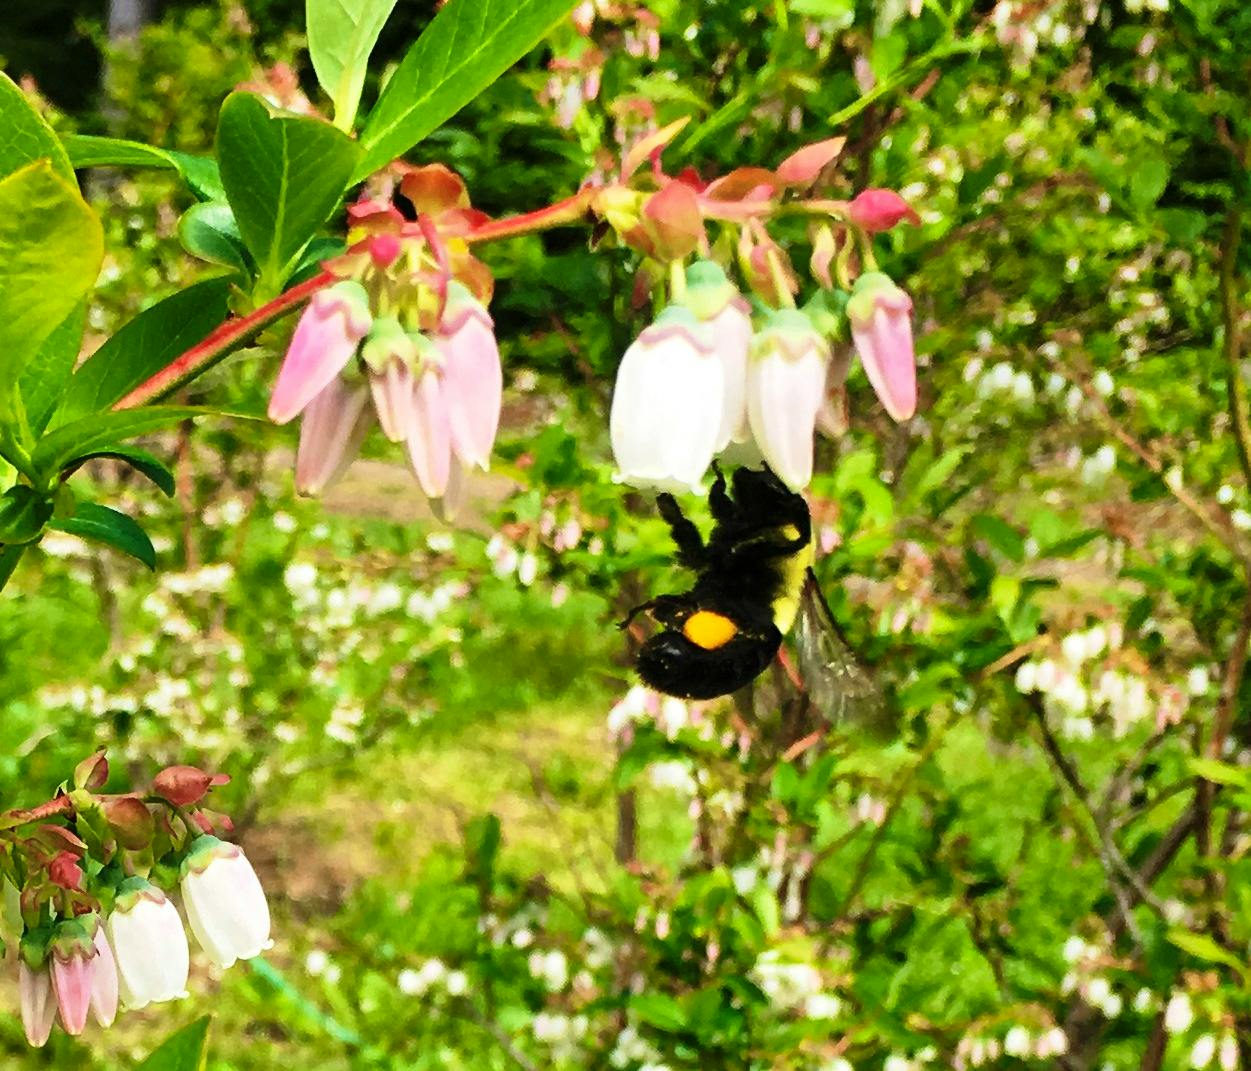 From Greenwich N.S., you can hear Terry Hennigar proclaim: "A sure sign of spring...finally!!"
He says that this little bee was busy in his blueberry patch on Monday morning.  The welcome weekend rain was needed for gardens; now Terry has put in an order for 25 mm of rain every week until September.  
That would be ideal Terry, especially if it fell at night!